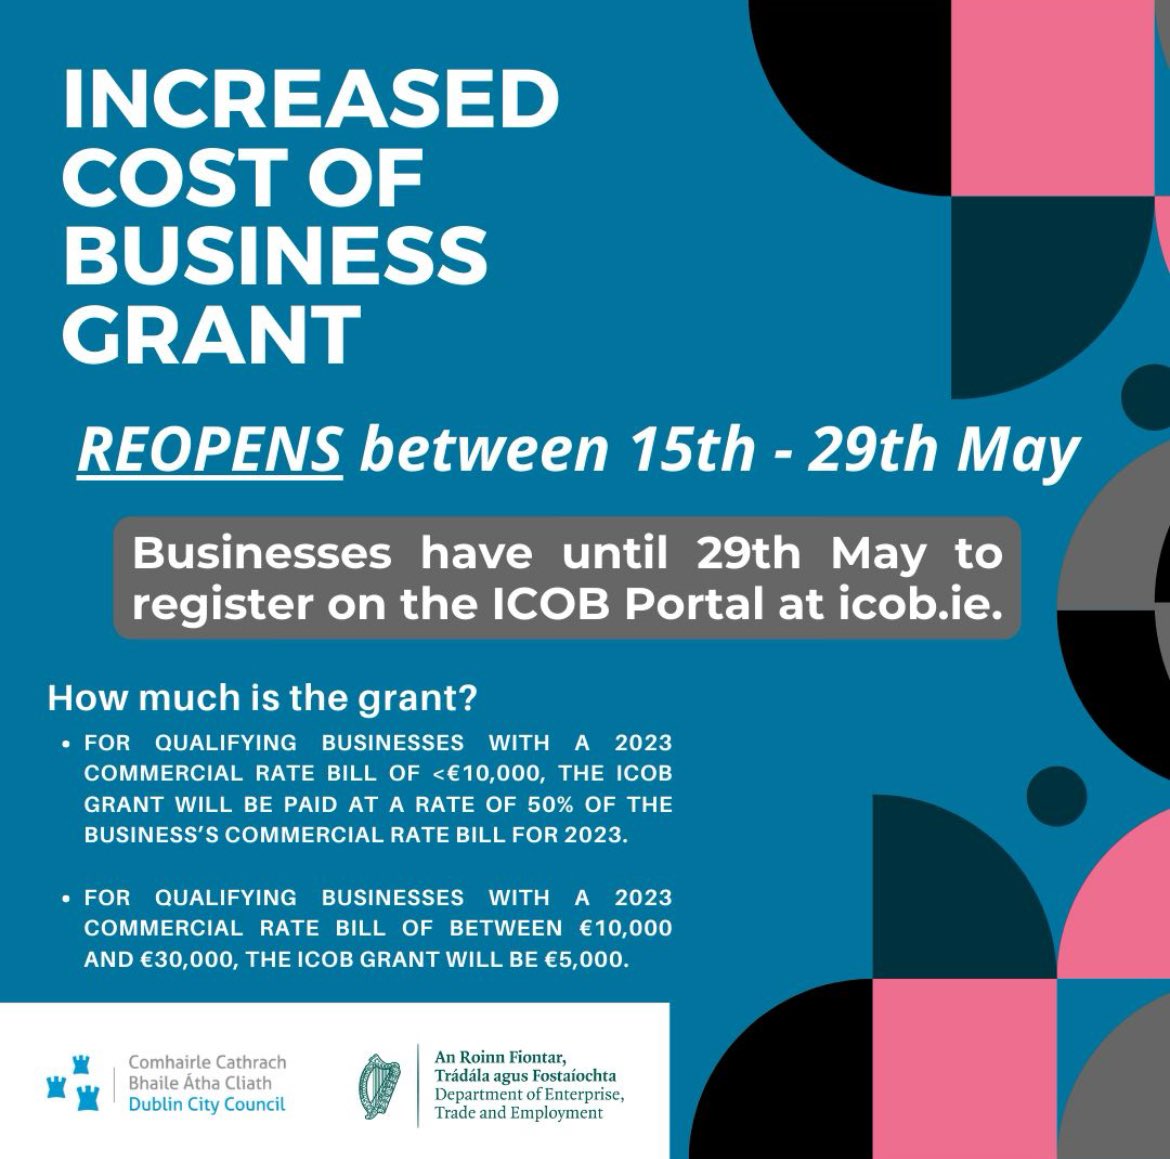 #NorthInnerCity businesses, don’t forget that the increased Cost of Business Grant application has reopened. Applications can be made until 29 May. Don’t miss out on this vital support. To register for the grant and for more information, visit mycoco.ie/icob #icob